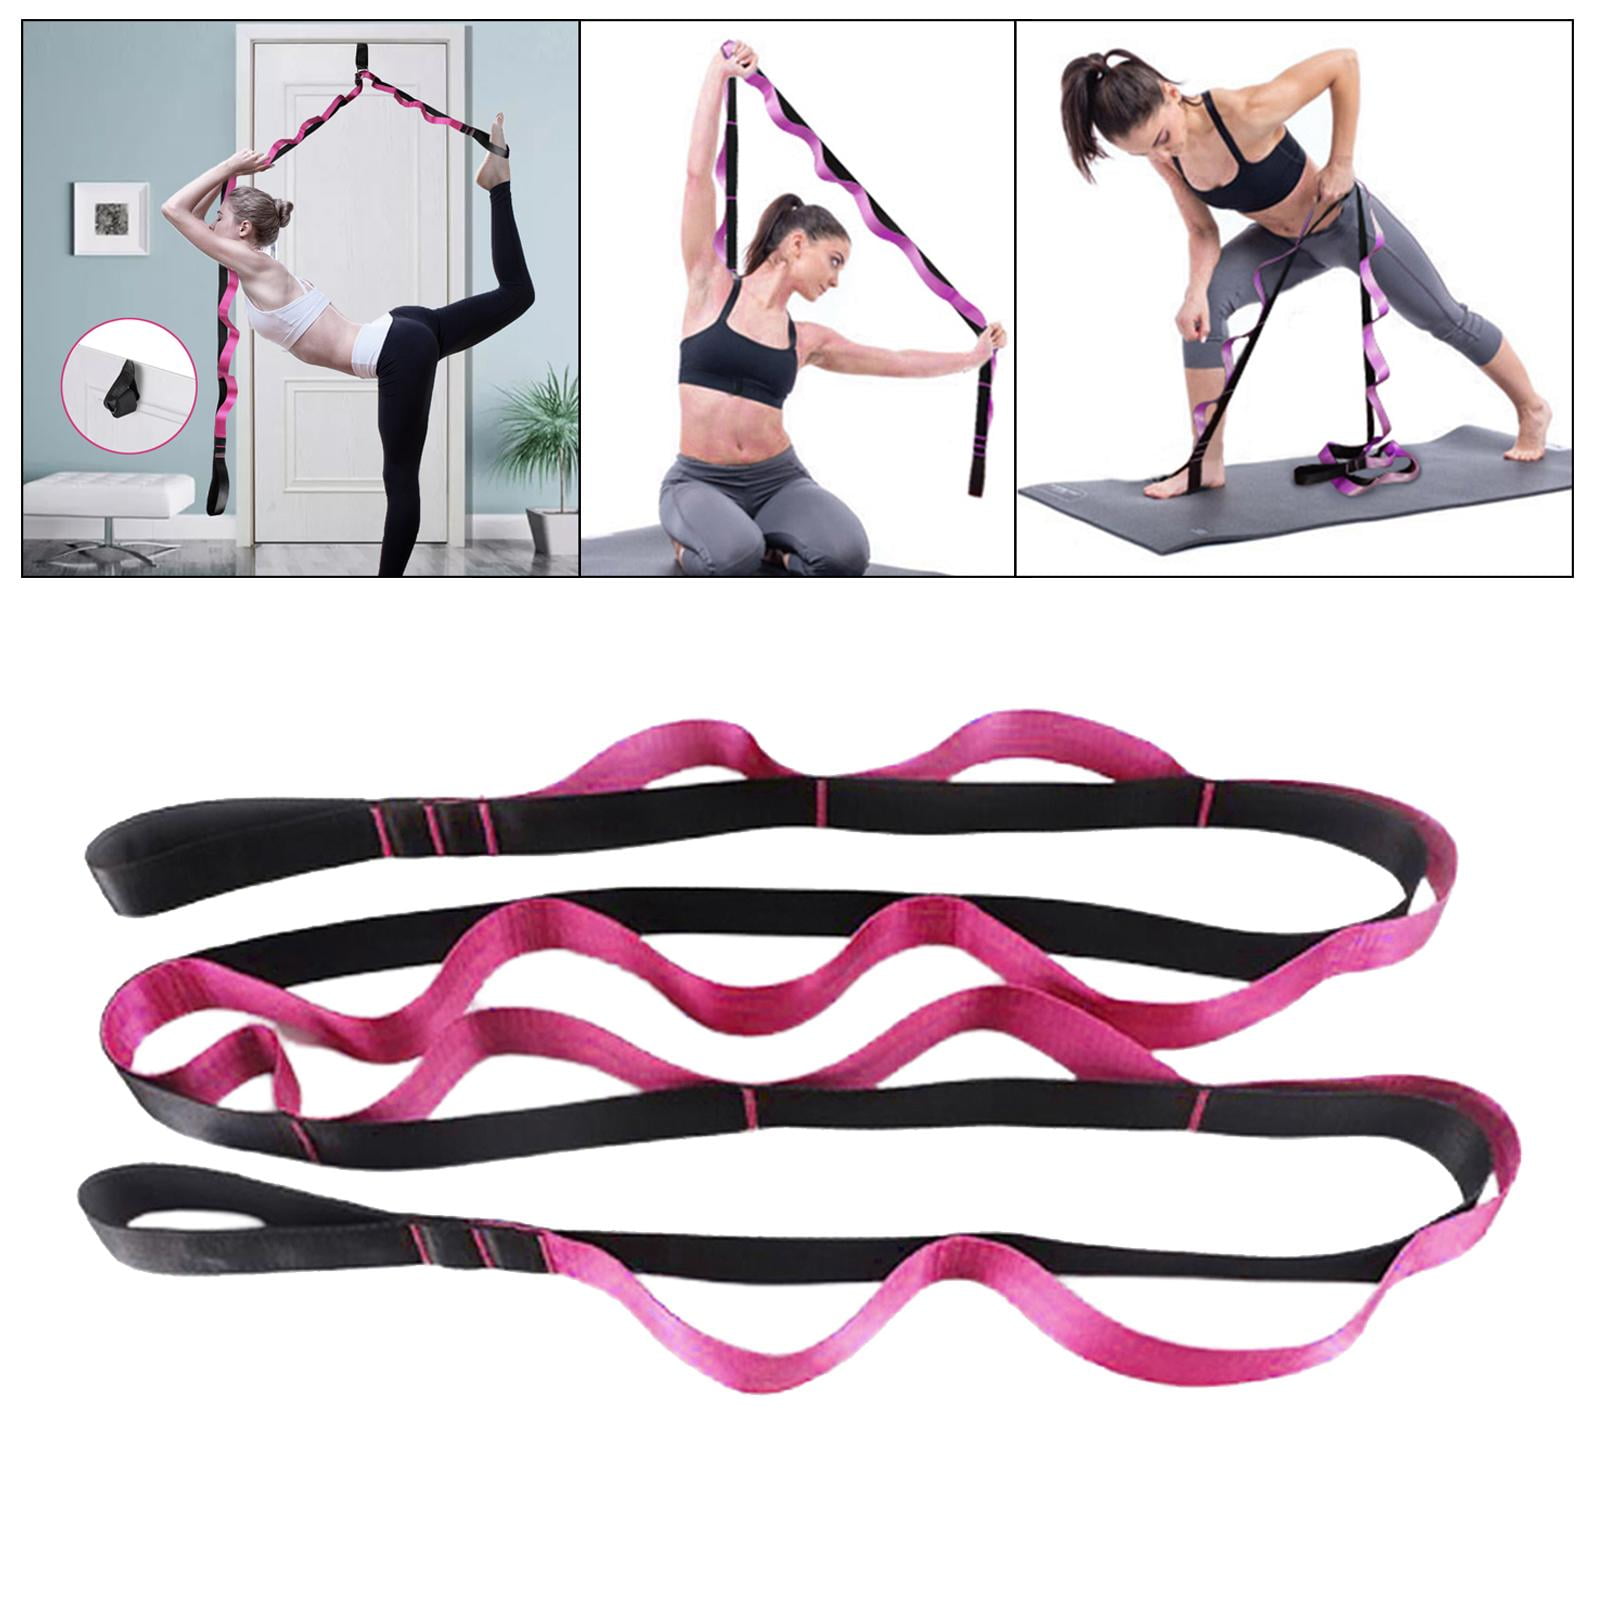 Details about   Latin Dance Yoga Stretching Belt Dance Lacing Adult Tool Tension Band Correct YD 